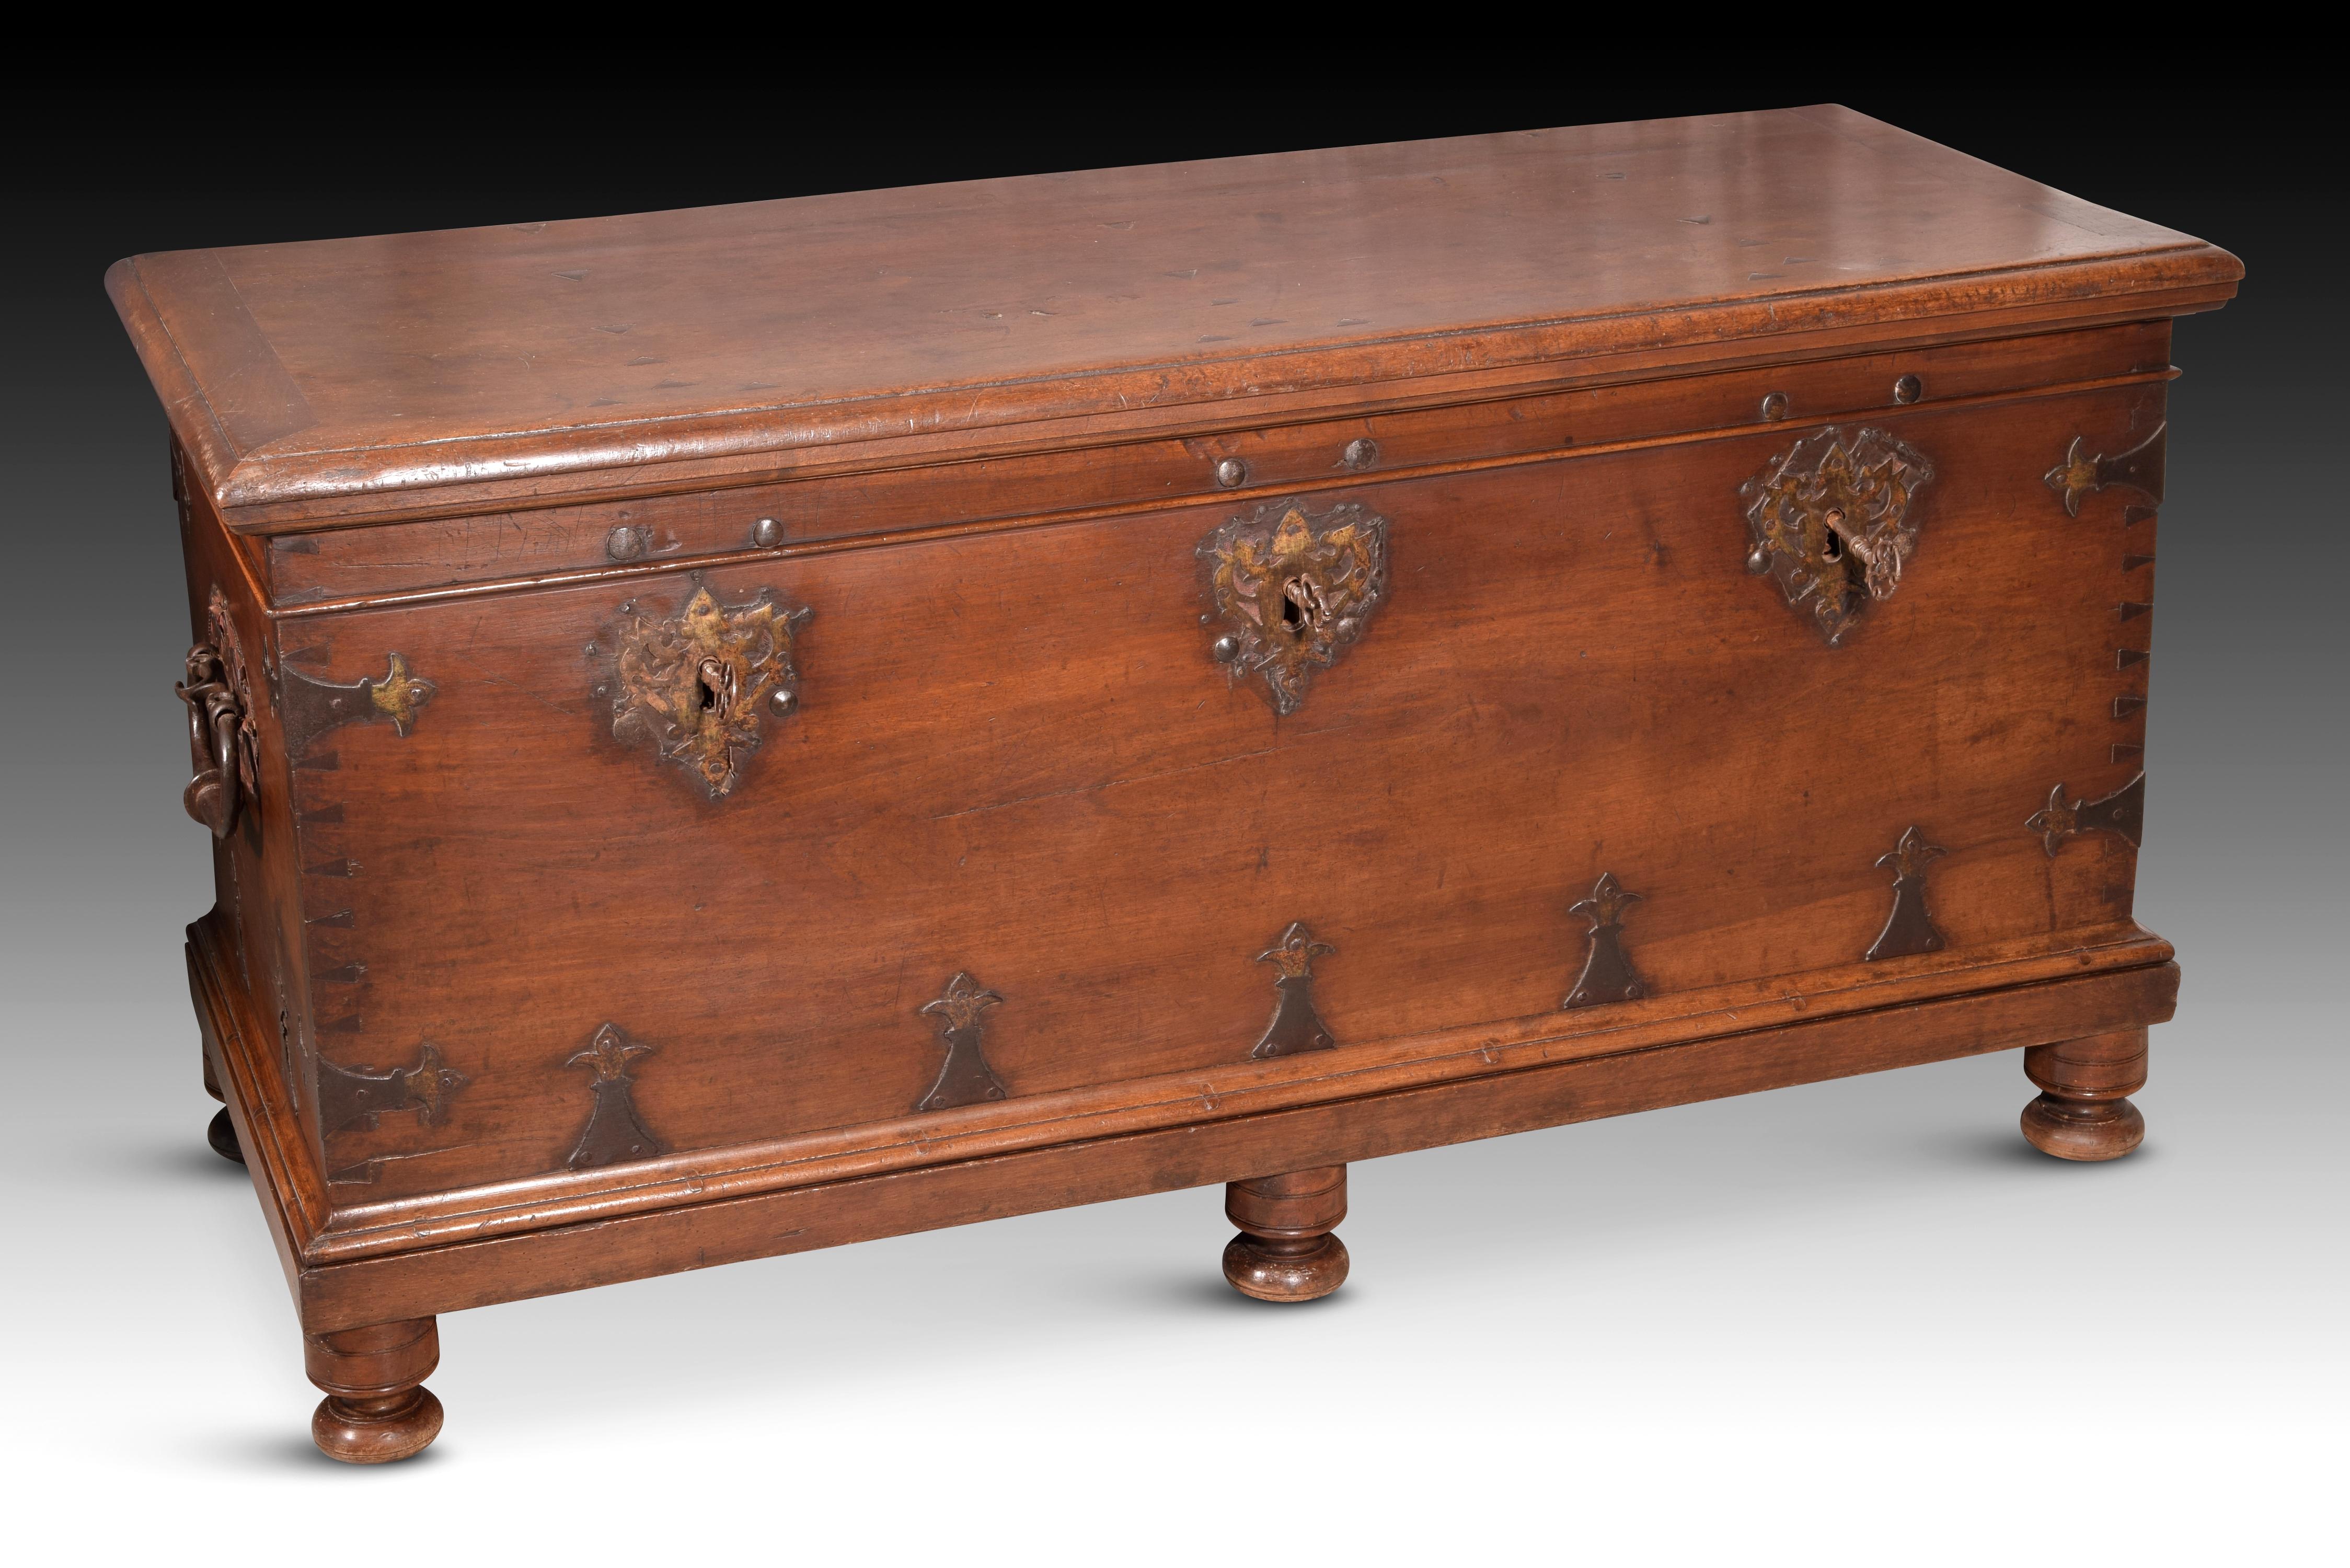 Town hall chest. Walnut wood. XVII century. 
Rectangular carved chest of walnut wood, with a flat lid, and simple decoration on its fronts with smooth moldings of different widths. It rises slightly from the ground thanks to six legs with a